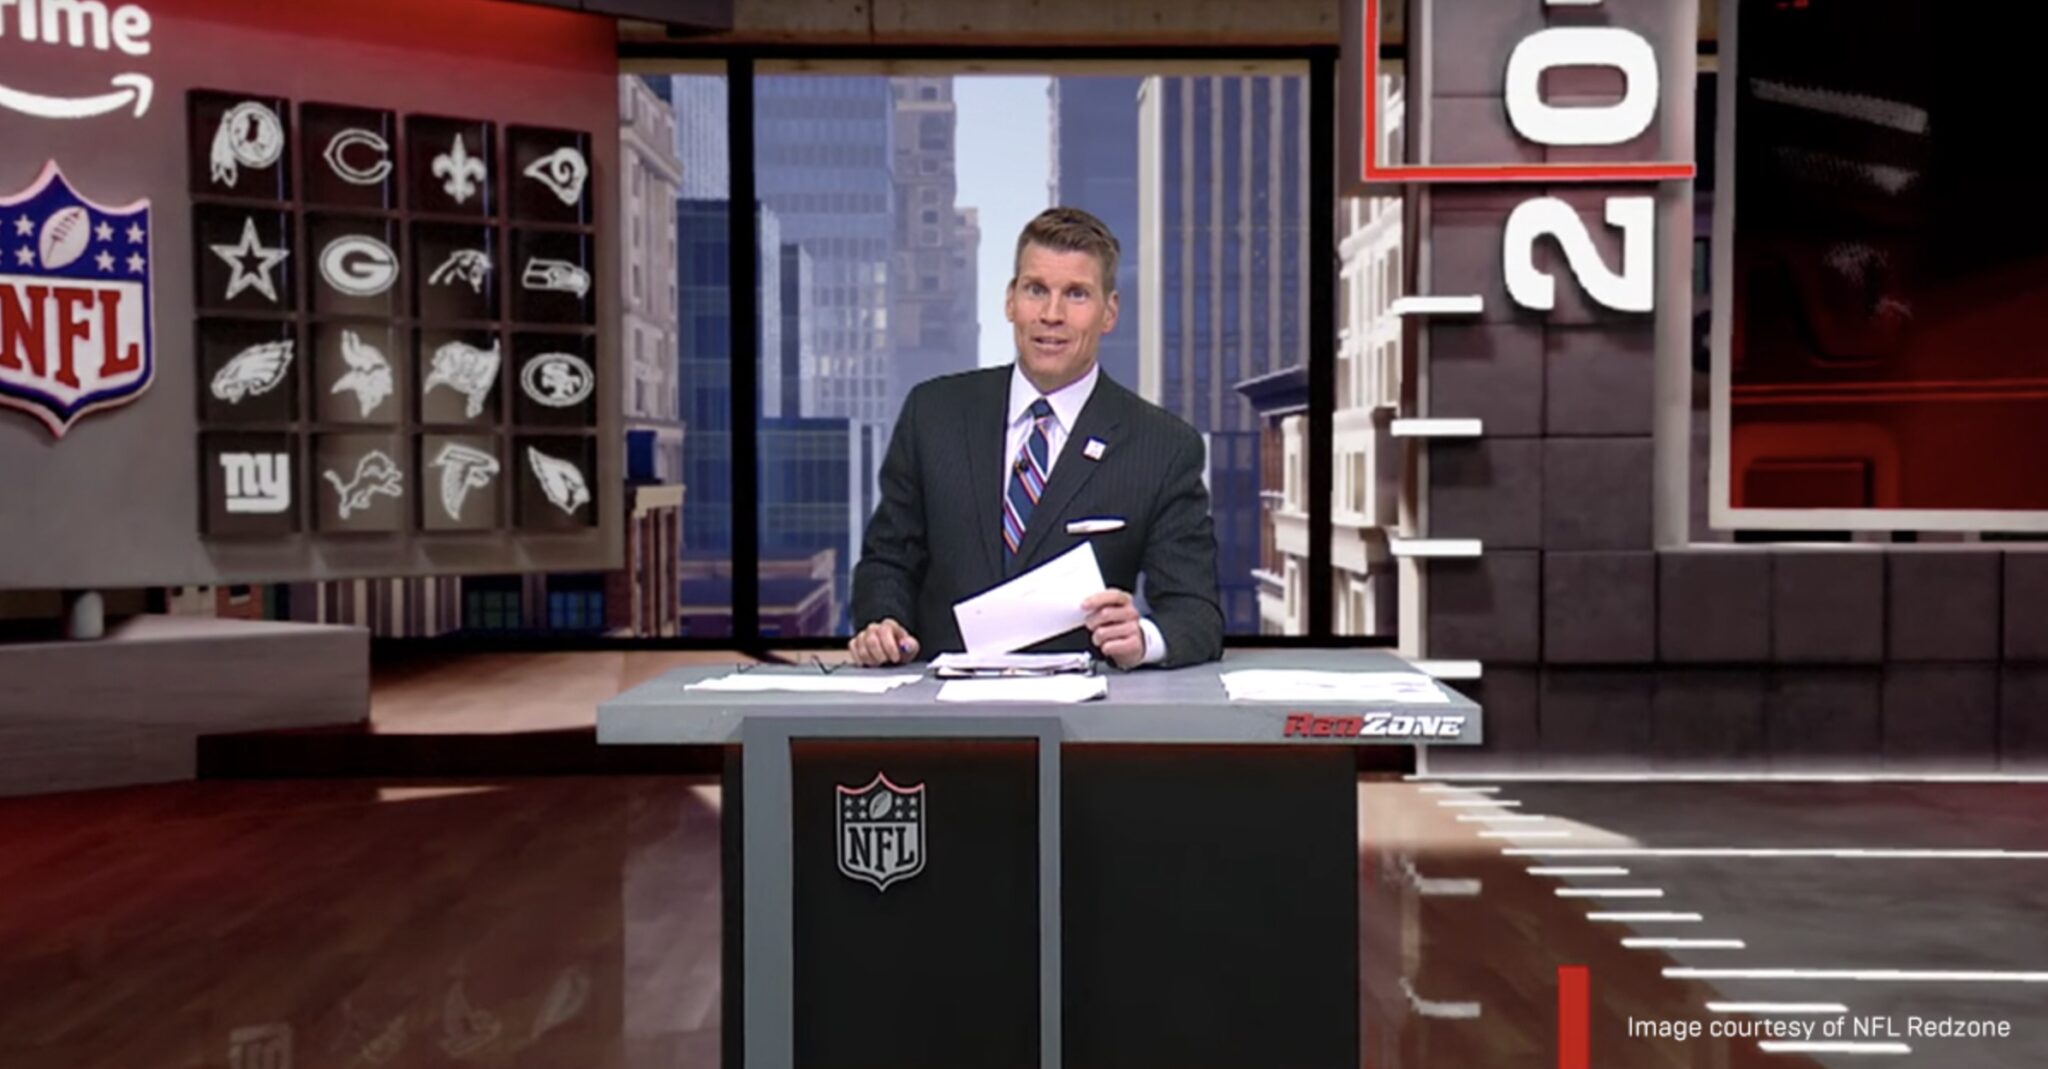 Photo Of Actual NFL RedZone Set Is Going Viral (PIC)